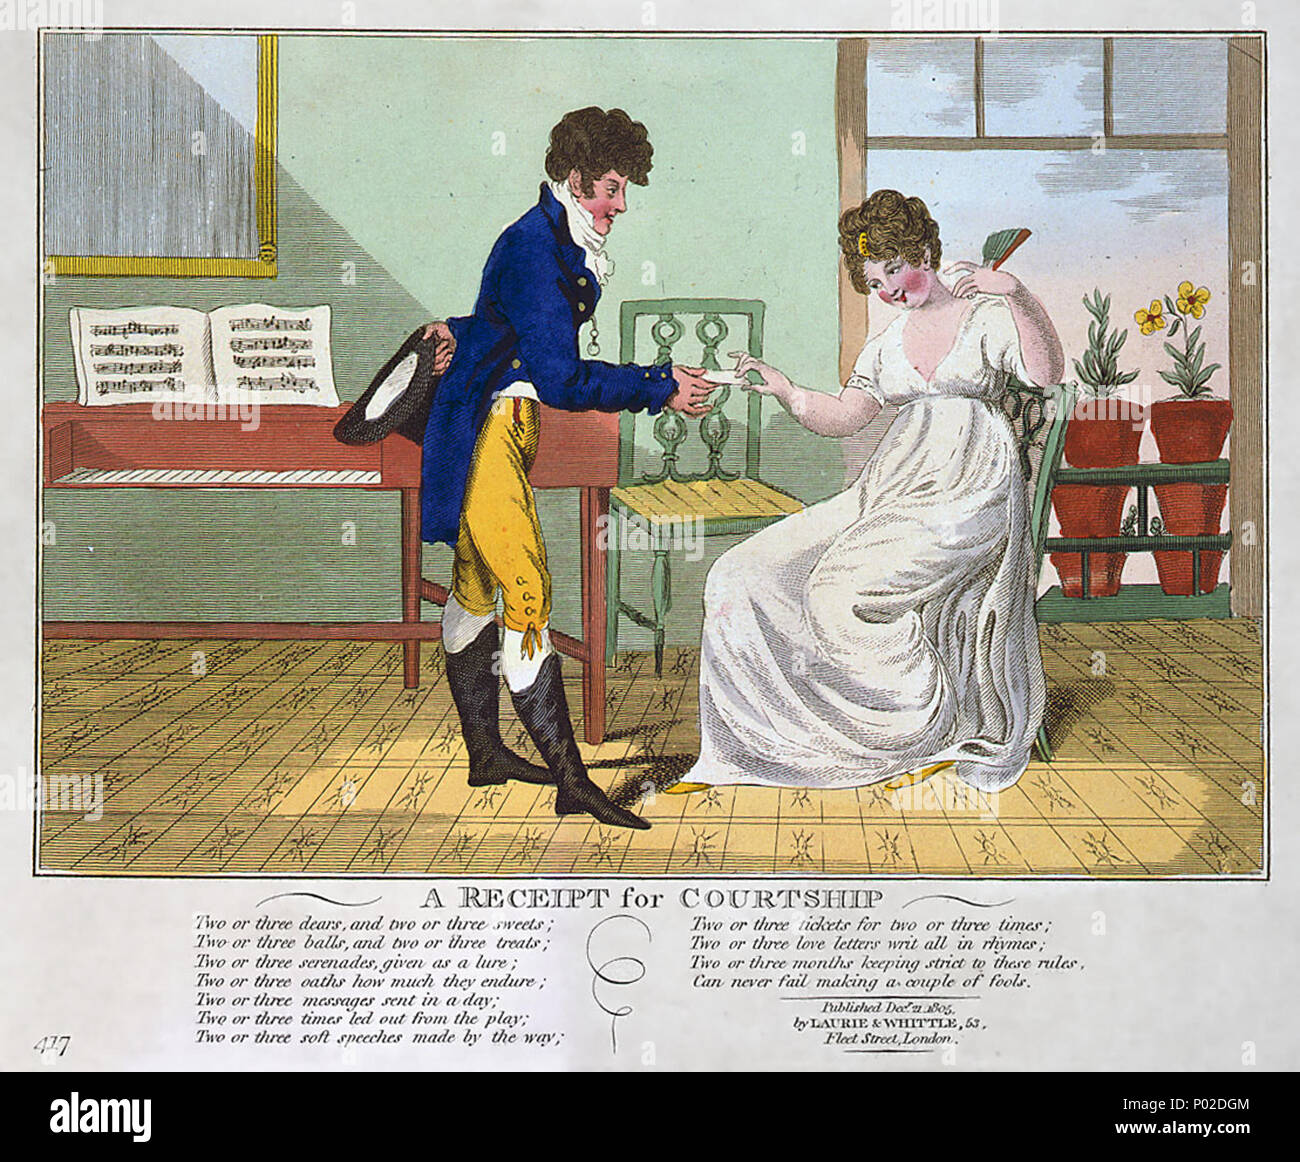 English A Receipt I E Recipe For Courtship A Dec 21st 1805 Caricature Mildly Satirizing The Courting Customs Or Romance Rituals Of 1805 England Poem Contained In Caricature Two Or Three Dears